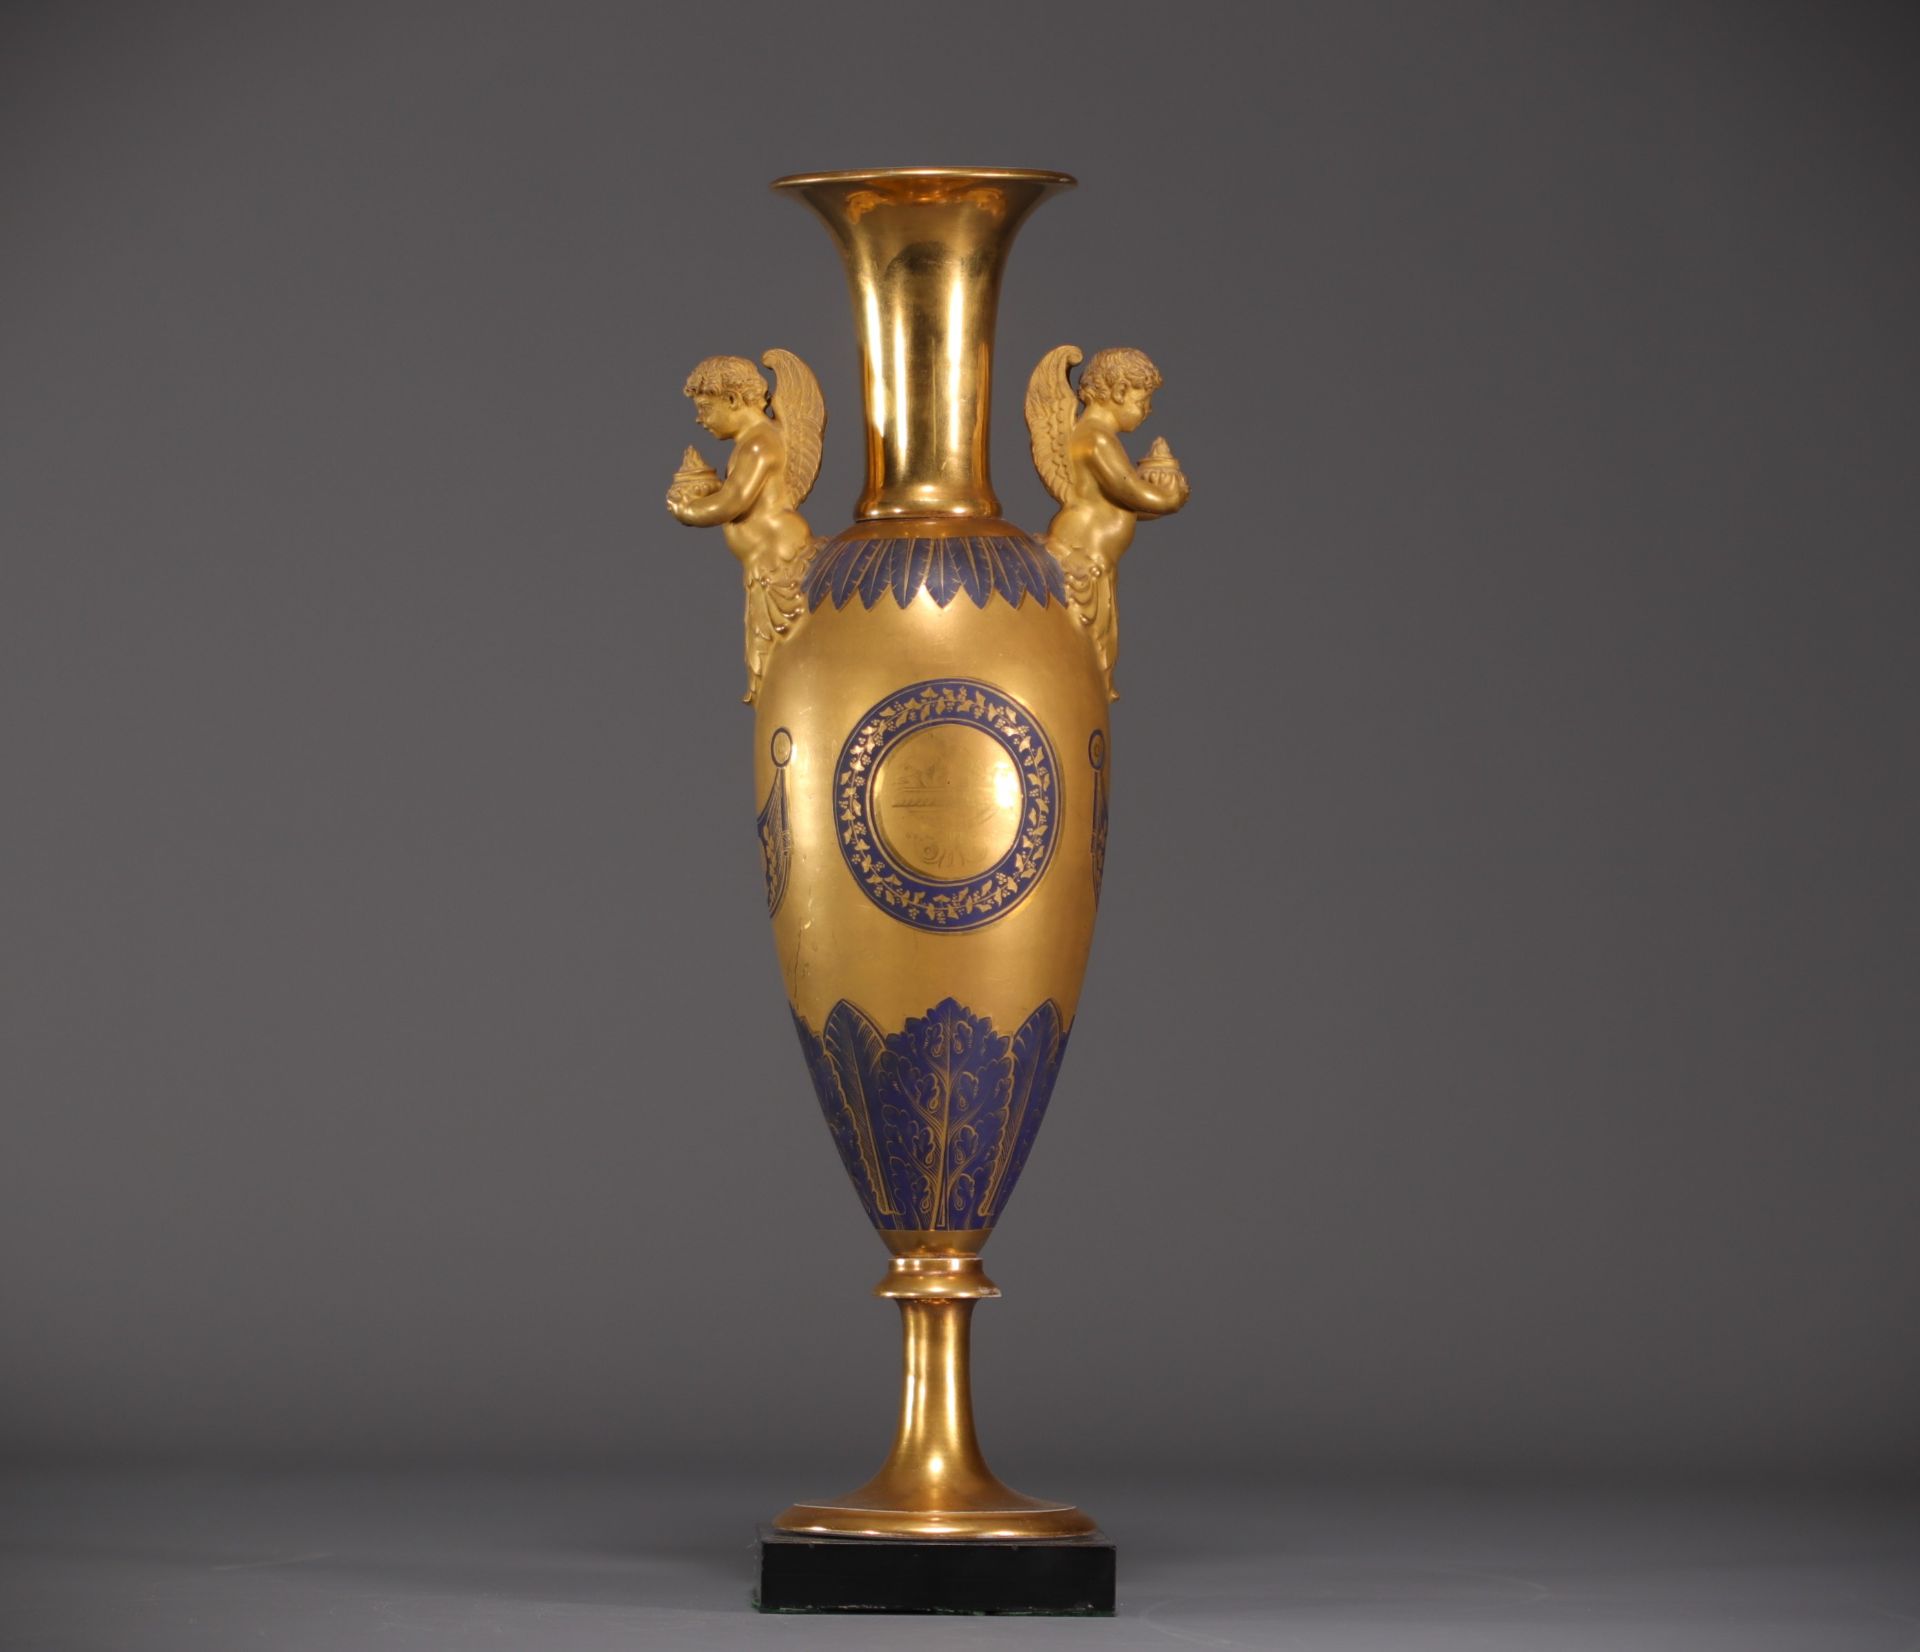 A rare royal blue and gold porcelain Empire baluster vase, first half of the 19th century.